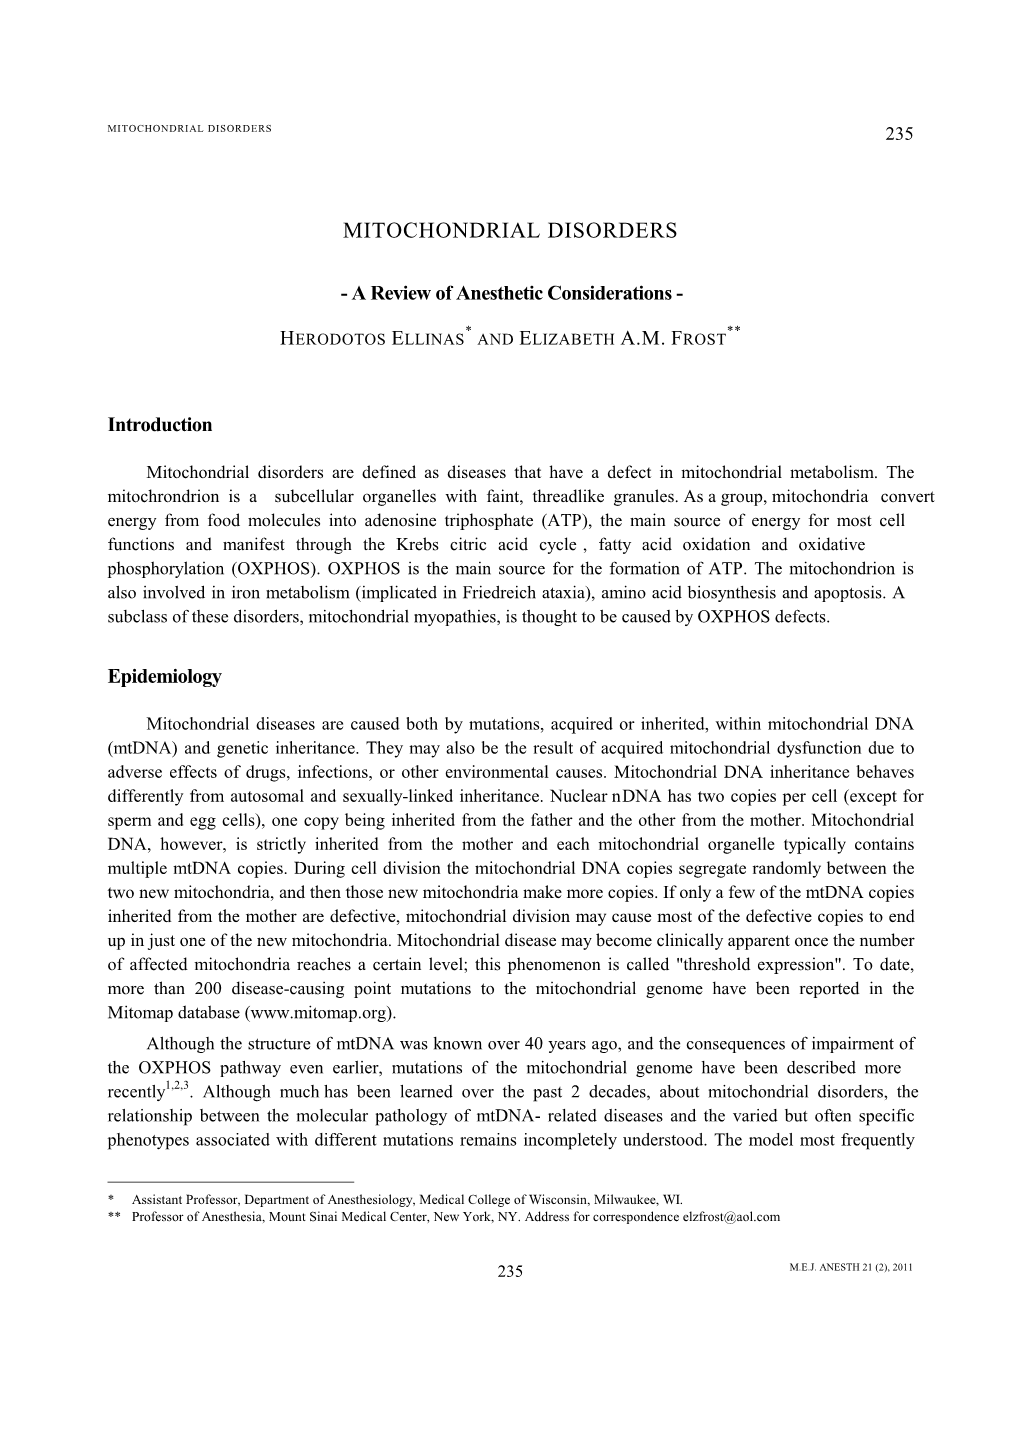 Mitochondrial Disorders a Review of Anesthetic Considerations.Pdf